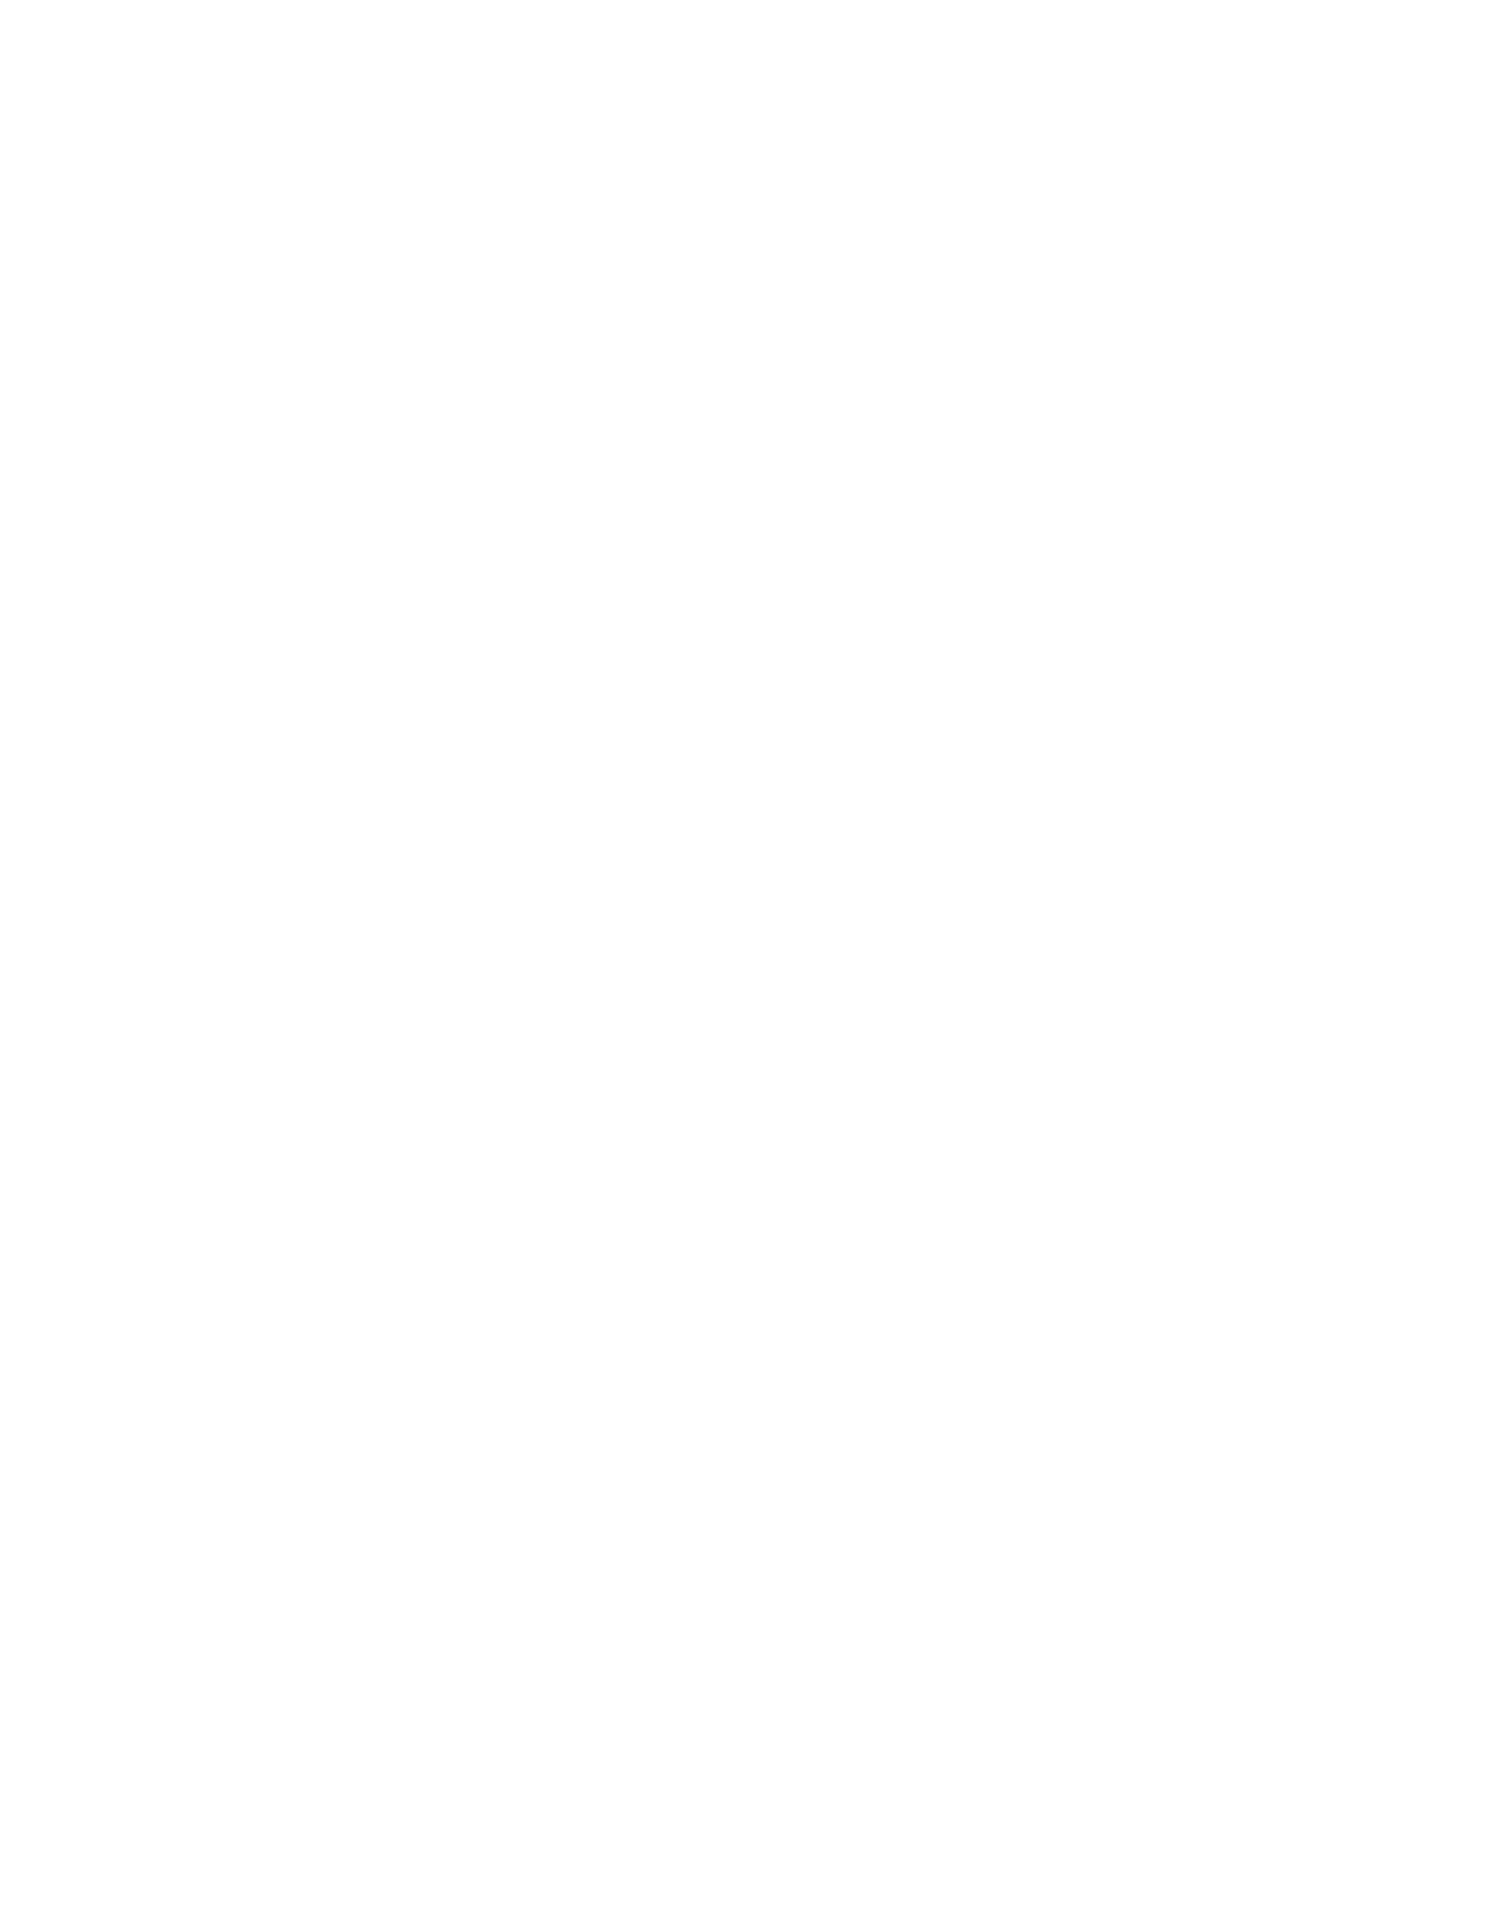 Cottleville Firefighters Outreach